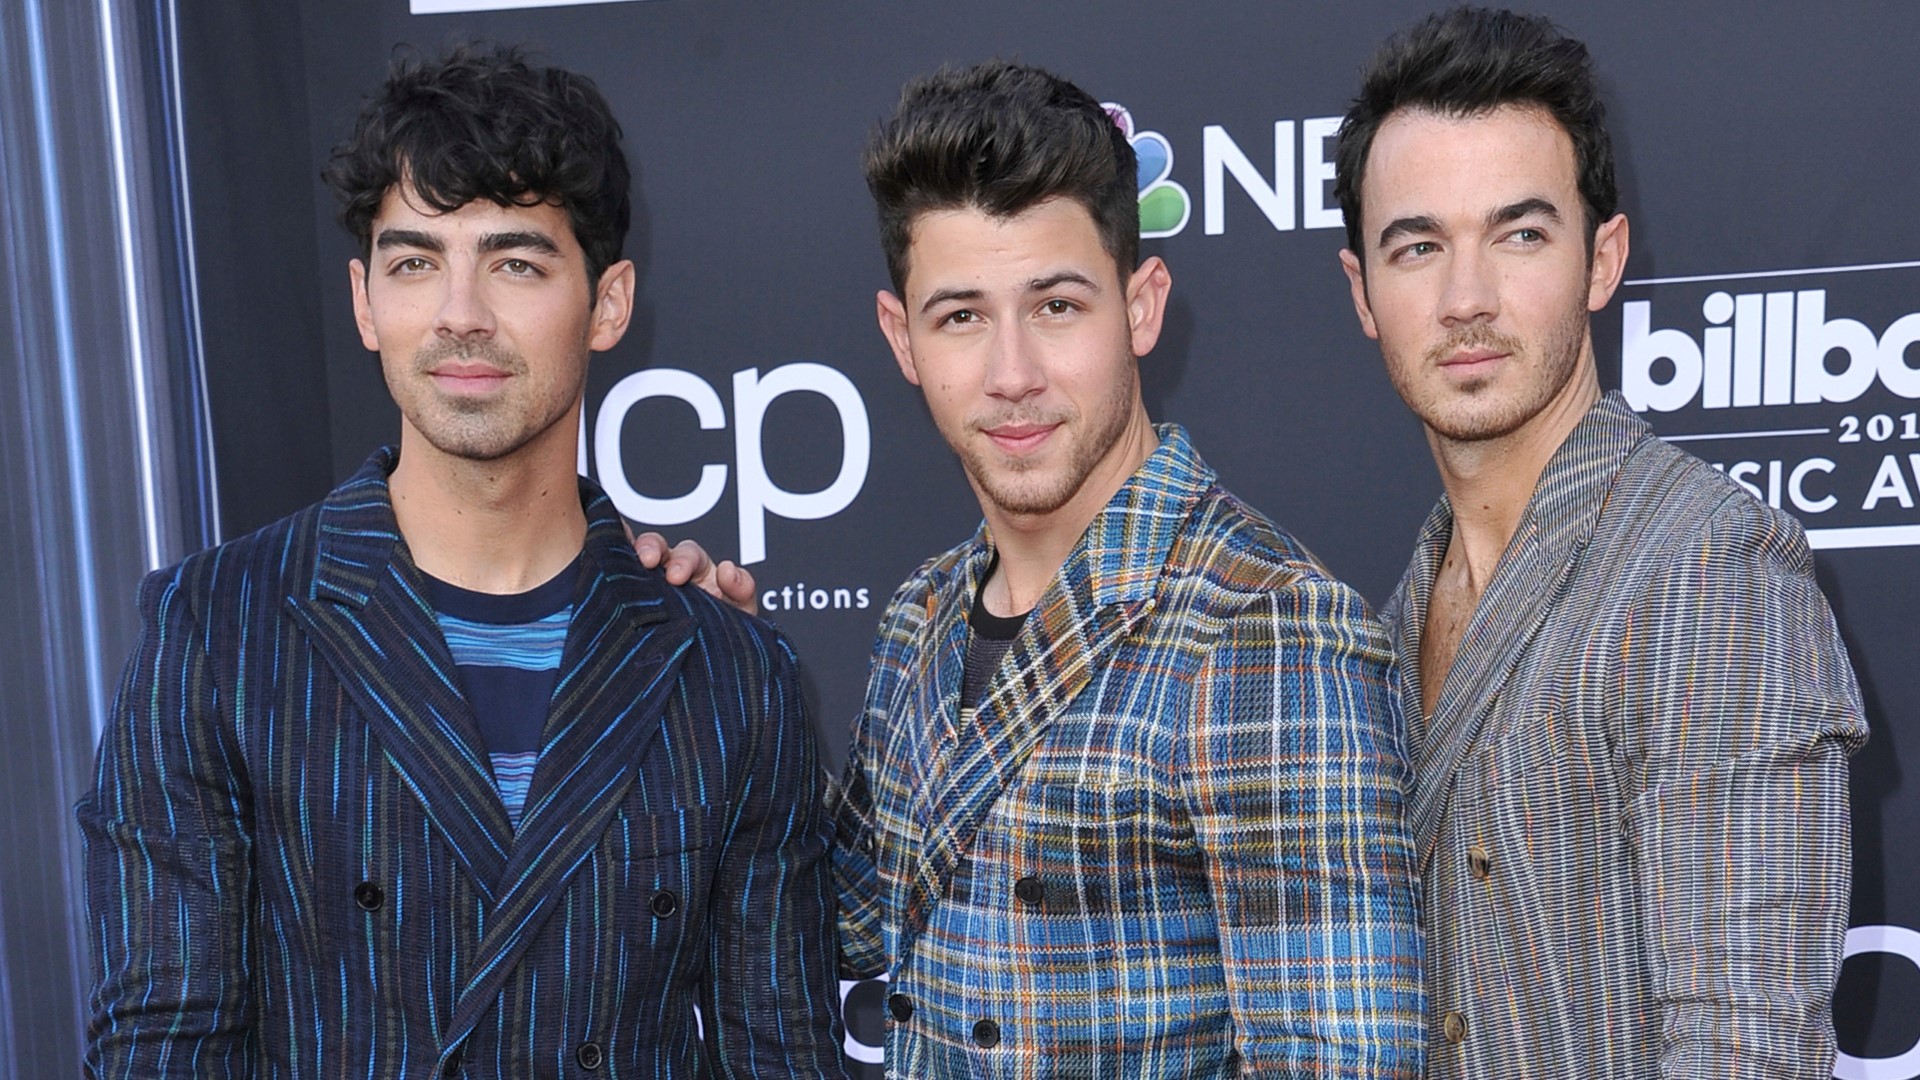 We've got an amazing give away for you! My West Michigan is partnering with the Van Andel Arena to give away five pairs of tickets to see the Jonas Brothers Happiness Begins concert on Sept. 8. And you'll be watching the show in style in one of Van Andel Arena's premium suites.